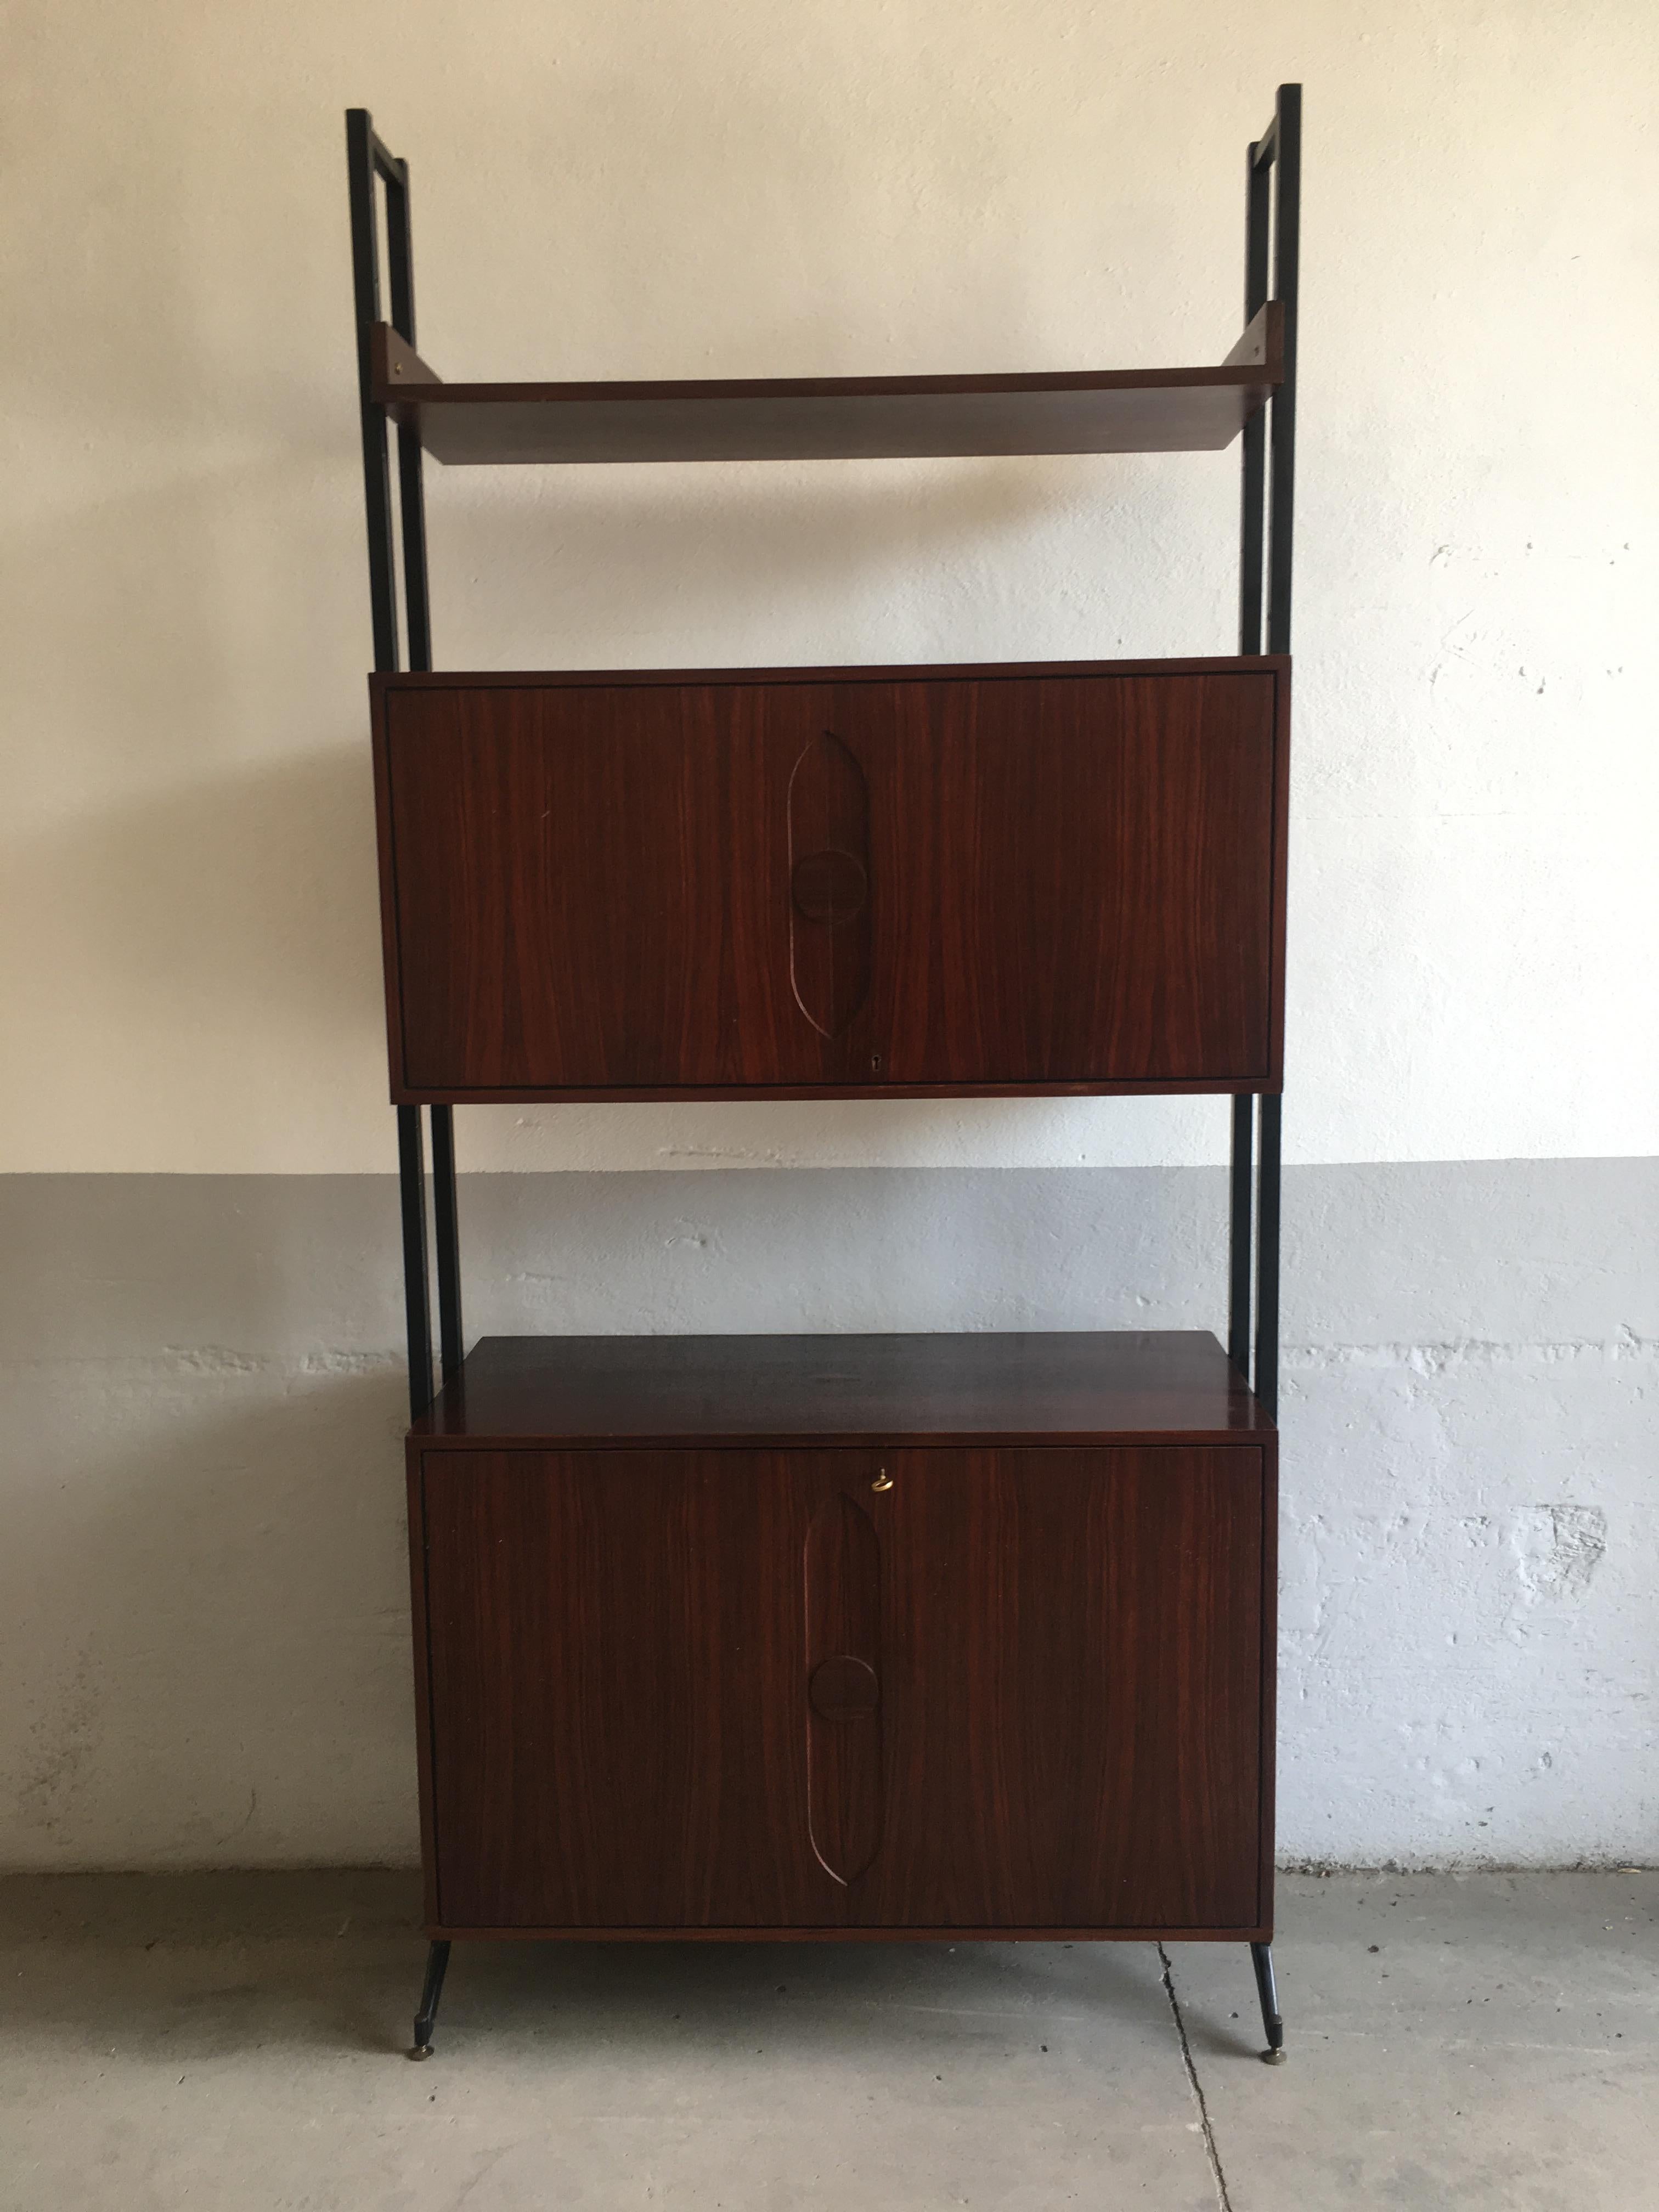 Danish Mid-Century Modern Dutch Wooden Bookcase with Shelf and Cabinets, 1970s For Sale